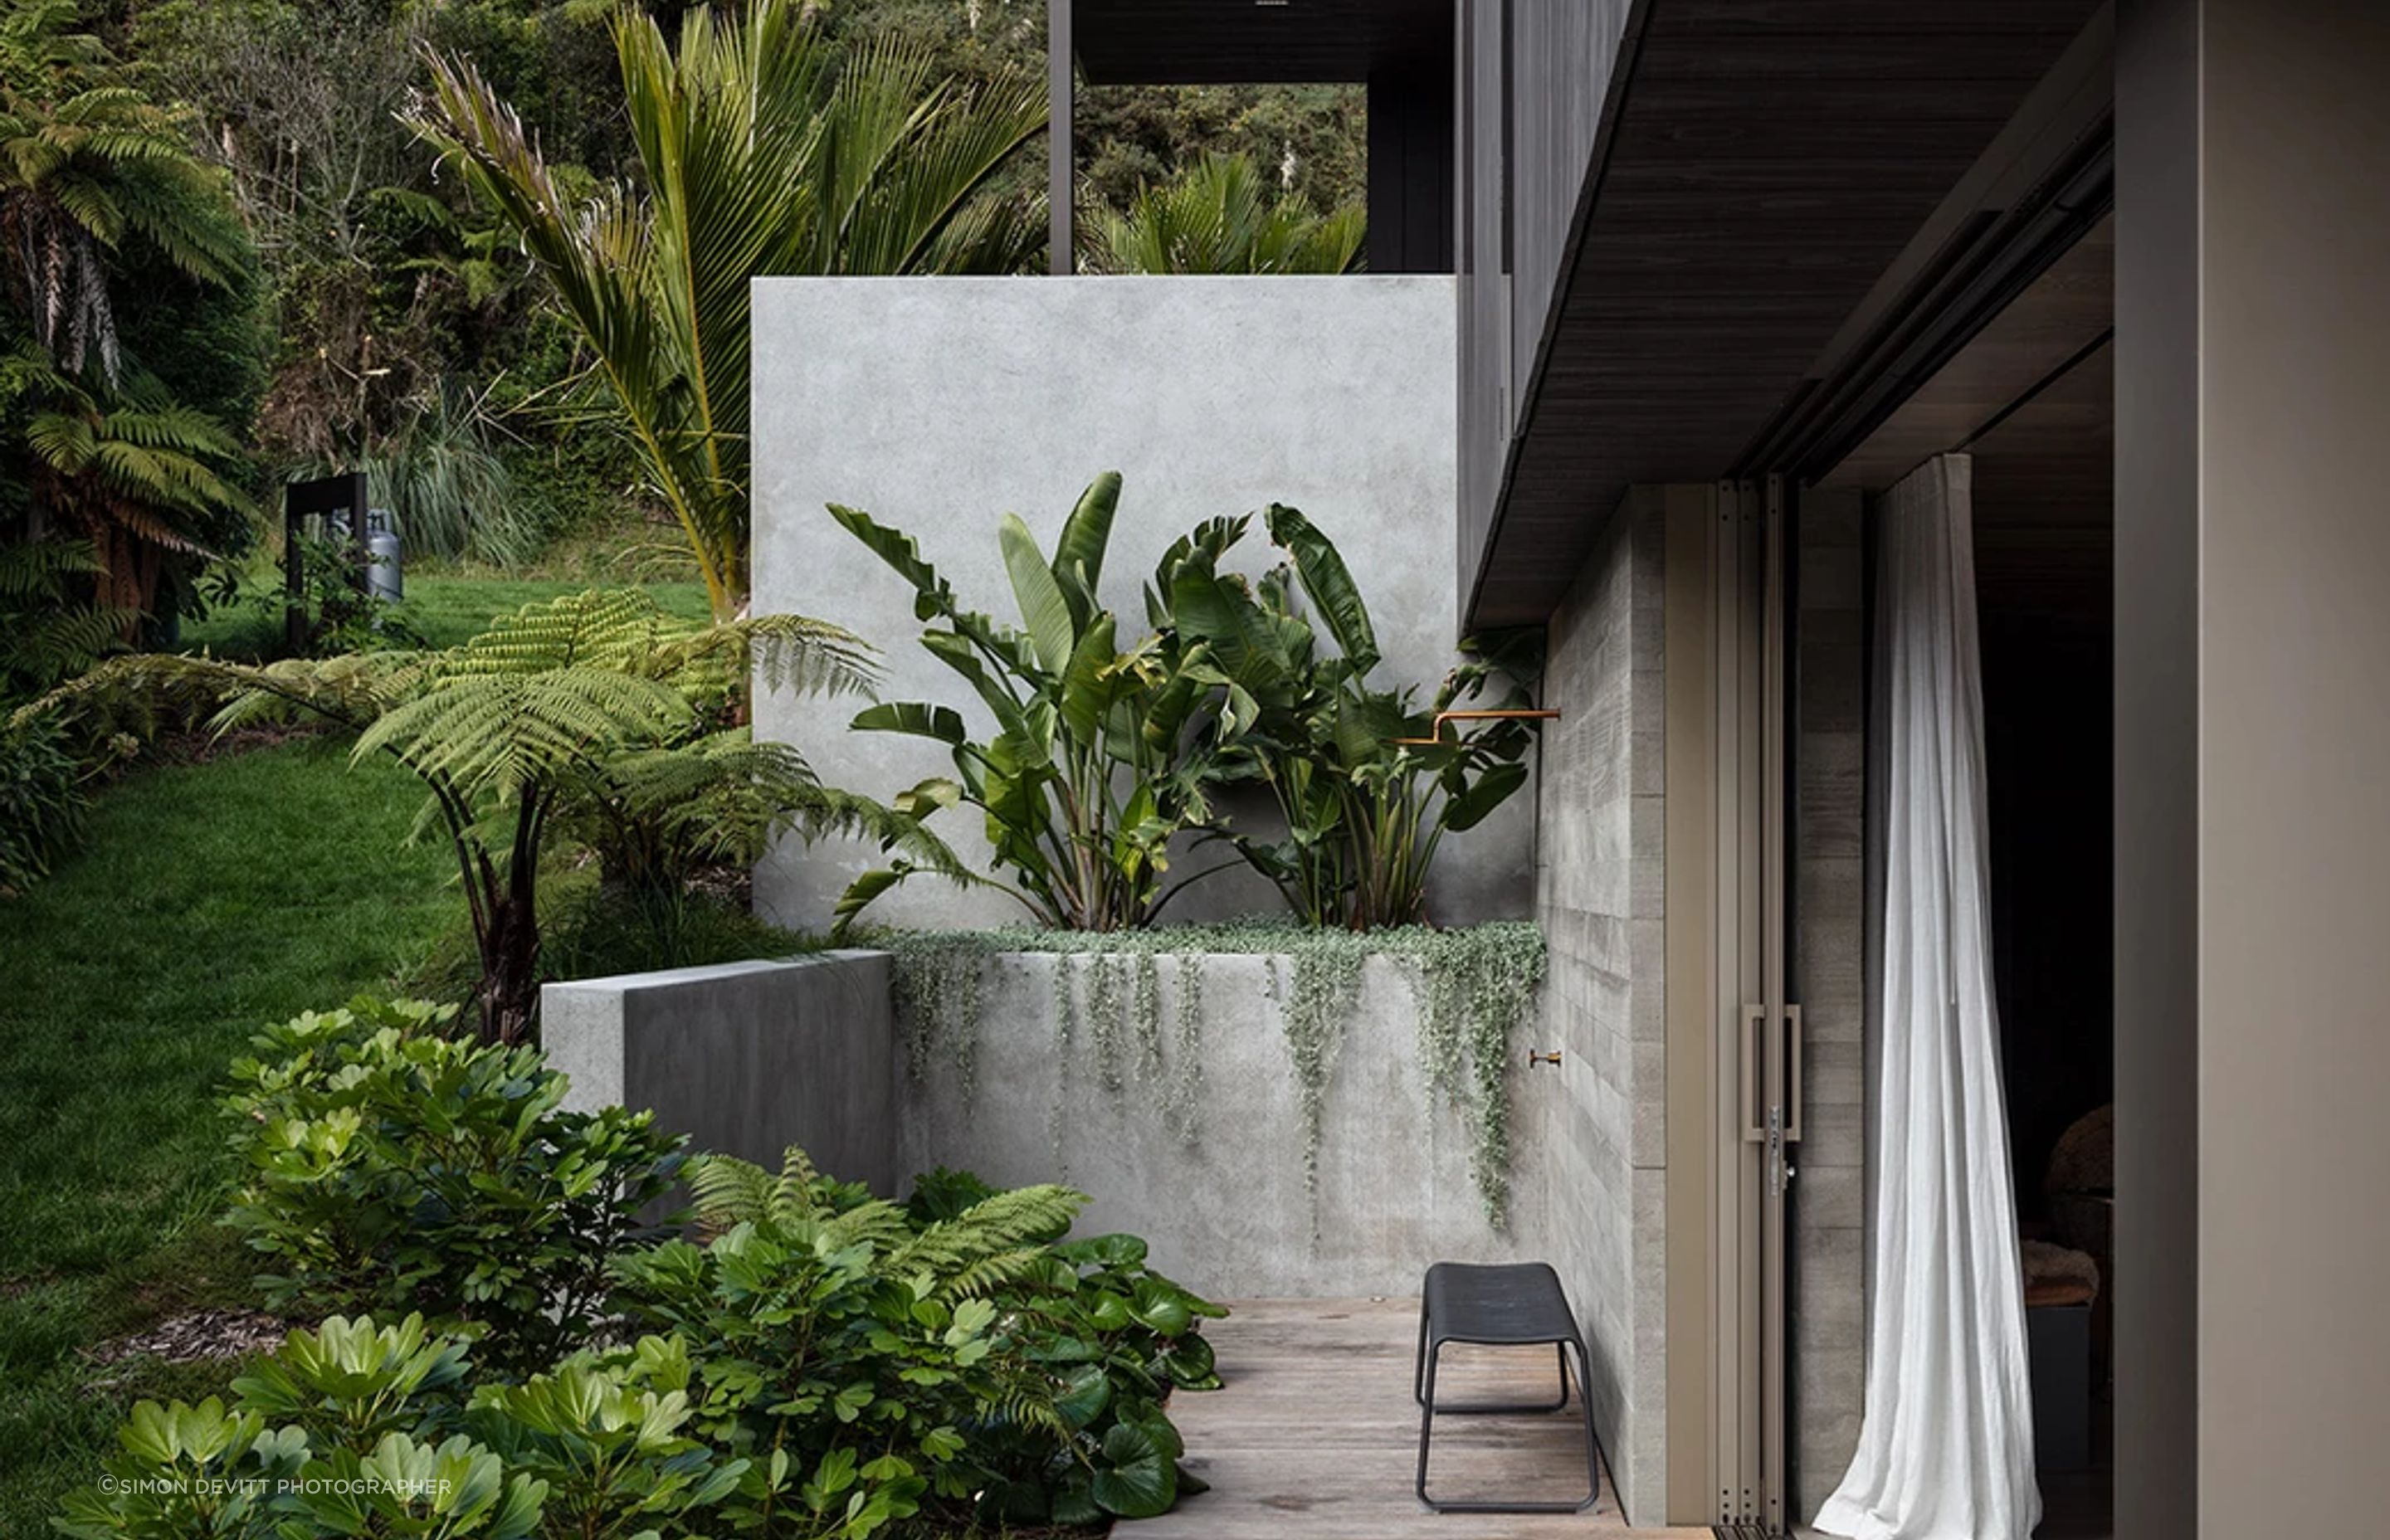 The outdoor shower. “There’s a double wall of concrete and the doors slide into a pocket between them. It looks easy, but actually building it is a real challenge,” says Evelyn. She mapped out the gardens, and Flora and Form designed and planted them.